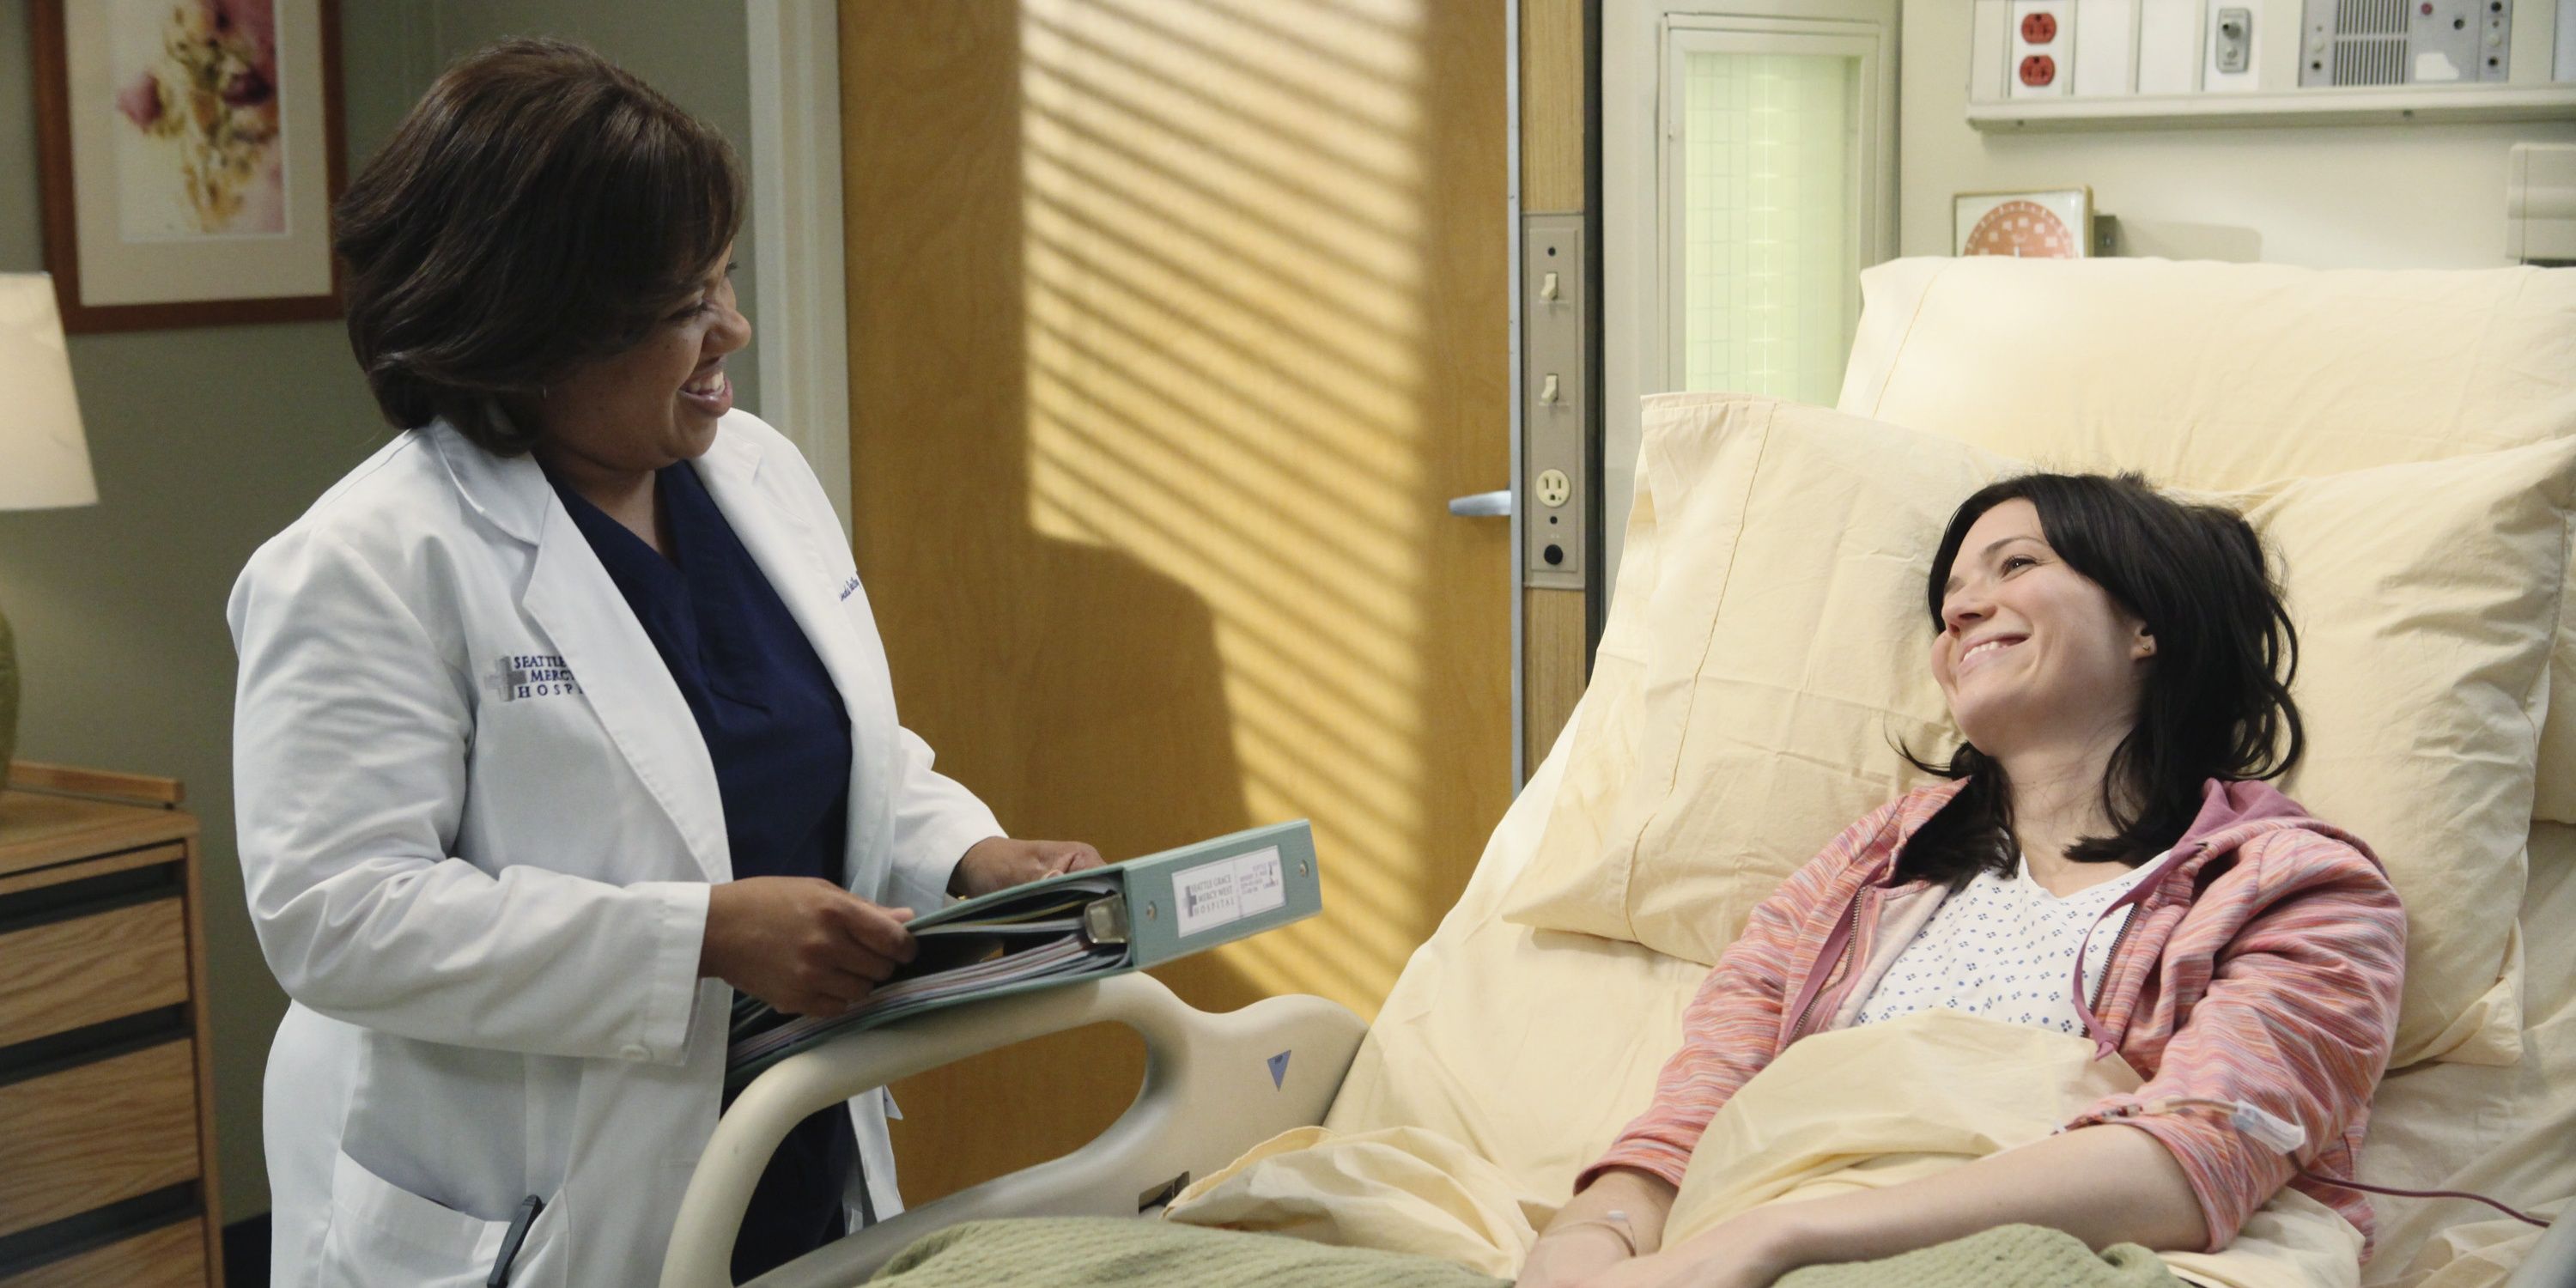 Chandra Wilson as Dr. Bailey standing next to Mandy Moore as Mary Portman in Sanctuary, Grey's Anatomy Episode